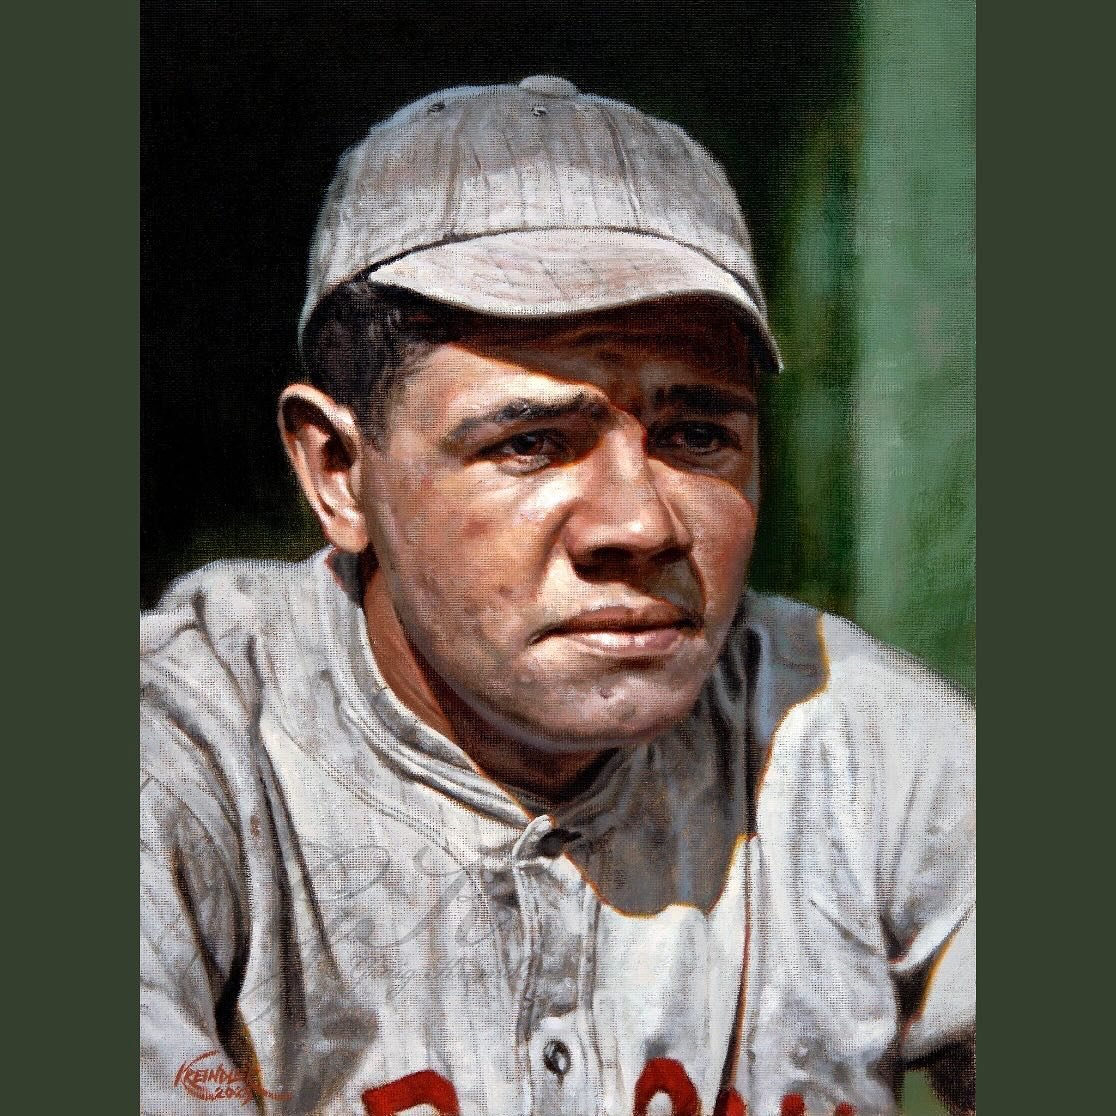 On this day in 1915, George Herman Ruth hit the first of his 714 career home runs. The blow came in the 3rd against NY&rsquo;s Jack Warhop and sailed into the second deck of the rightfield stands at the Polo Grounds. Here&rsquo;s my painting of him a